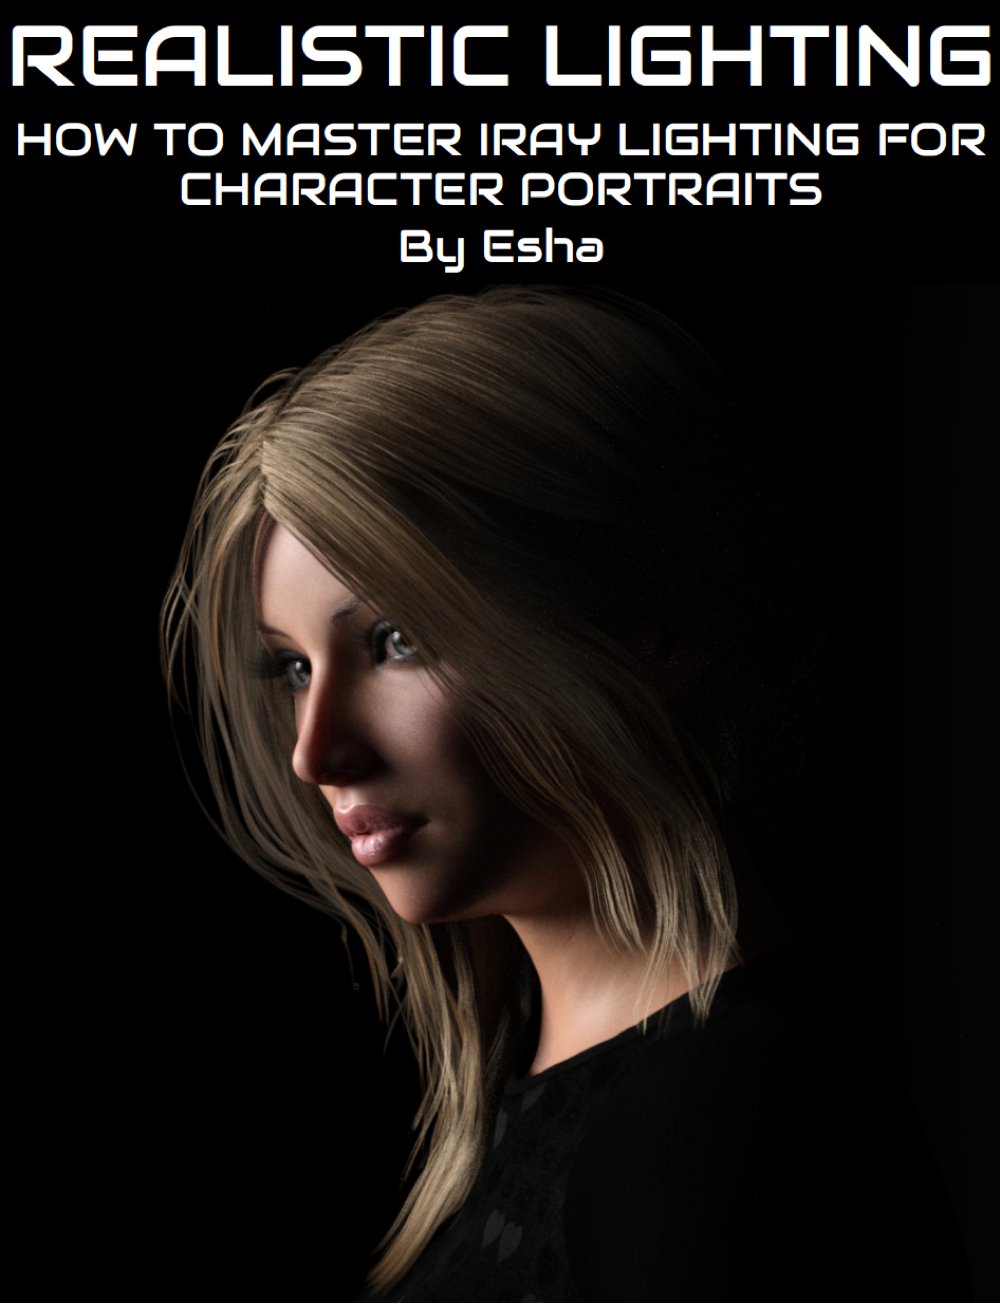 How to Master Iray Lighting for Realistic Character Portraits by: Digital Art Liveesha, 3D Models by Daz 3D